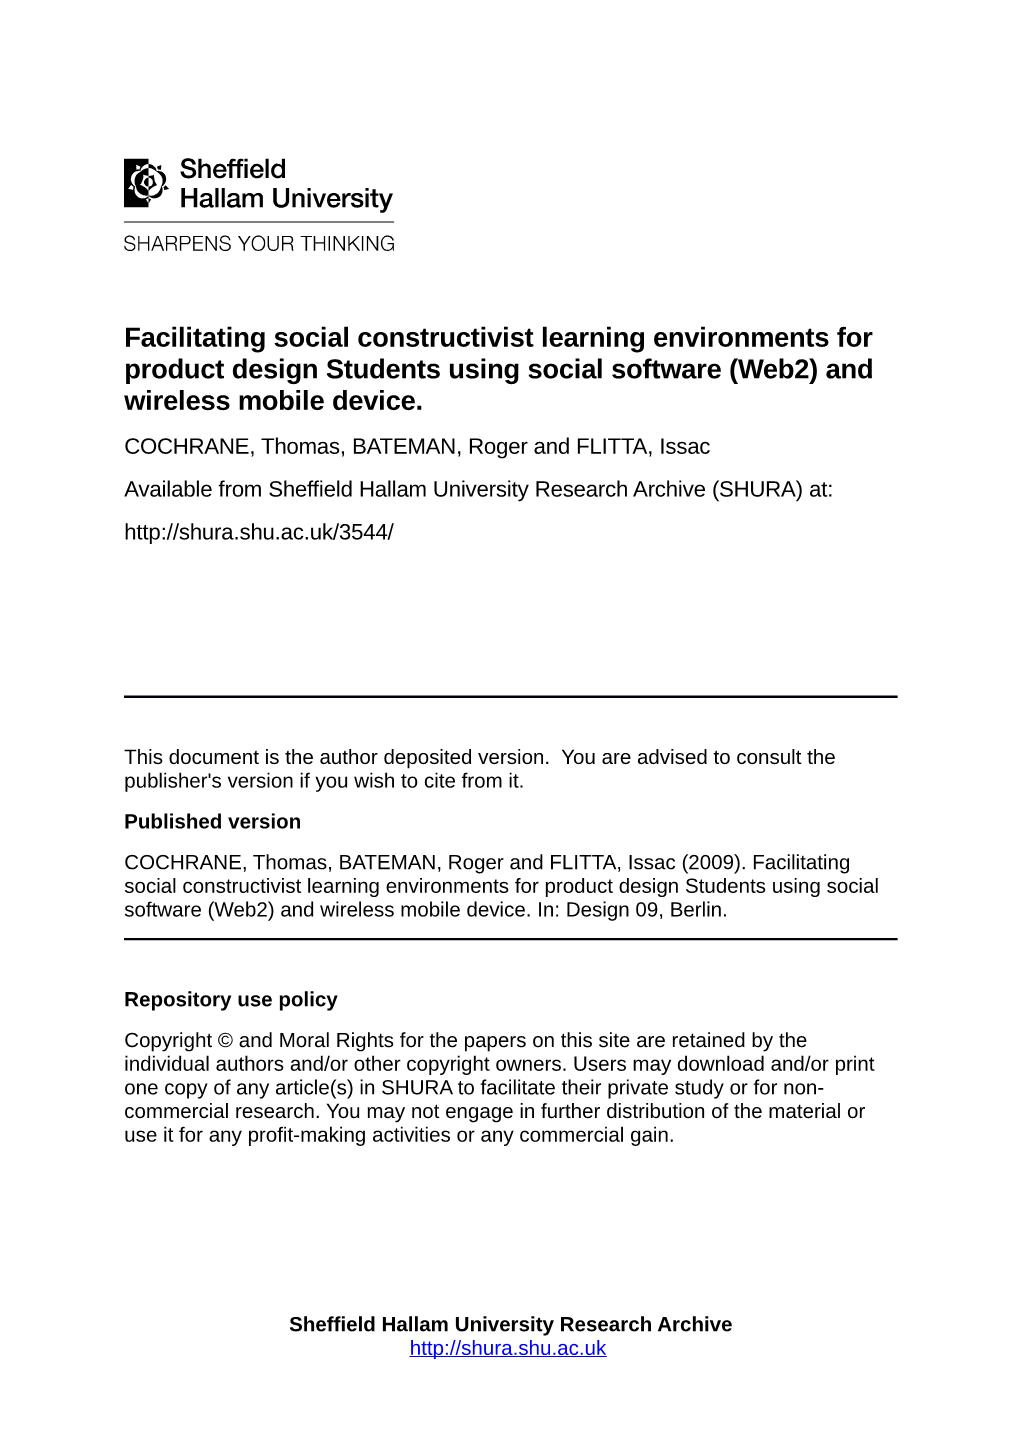 Facilitating Social Constructivist Learning Environments for Product Design Students Using Social Software (Web2) and Wireless Mobile Device